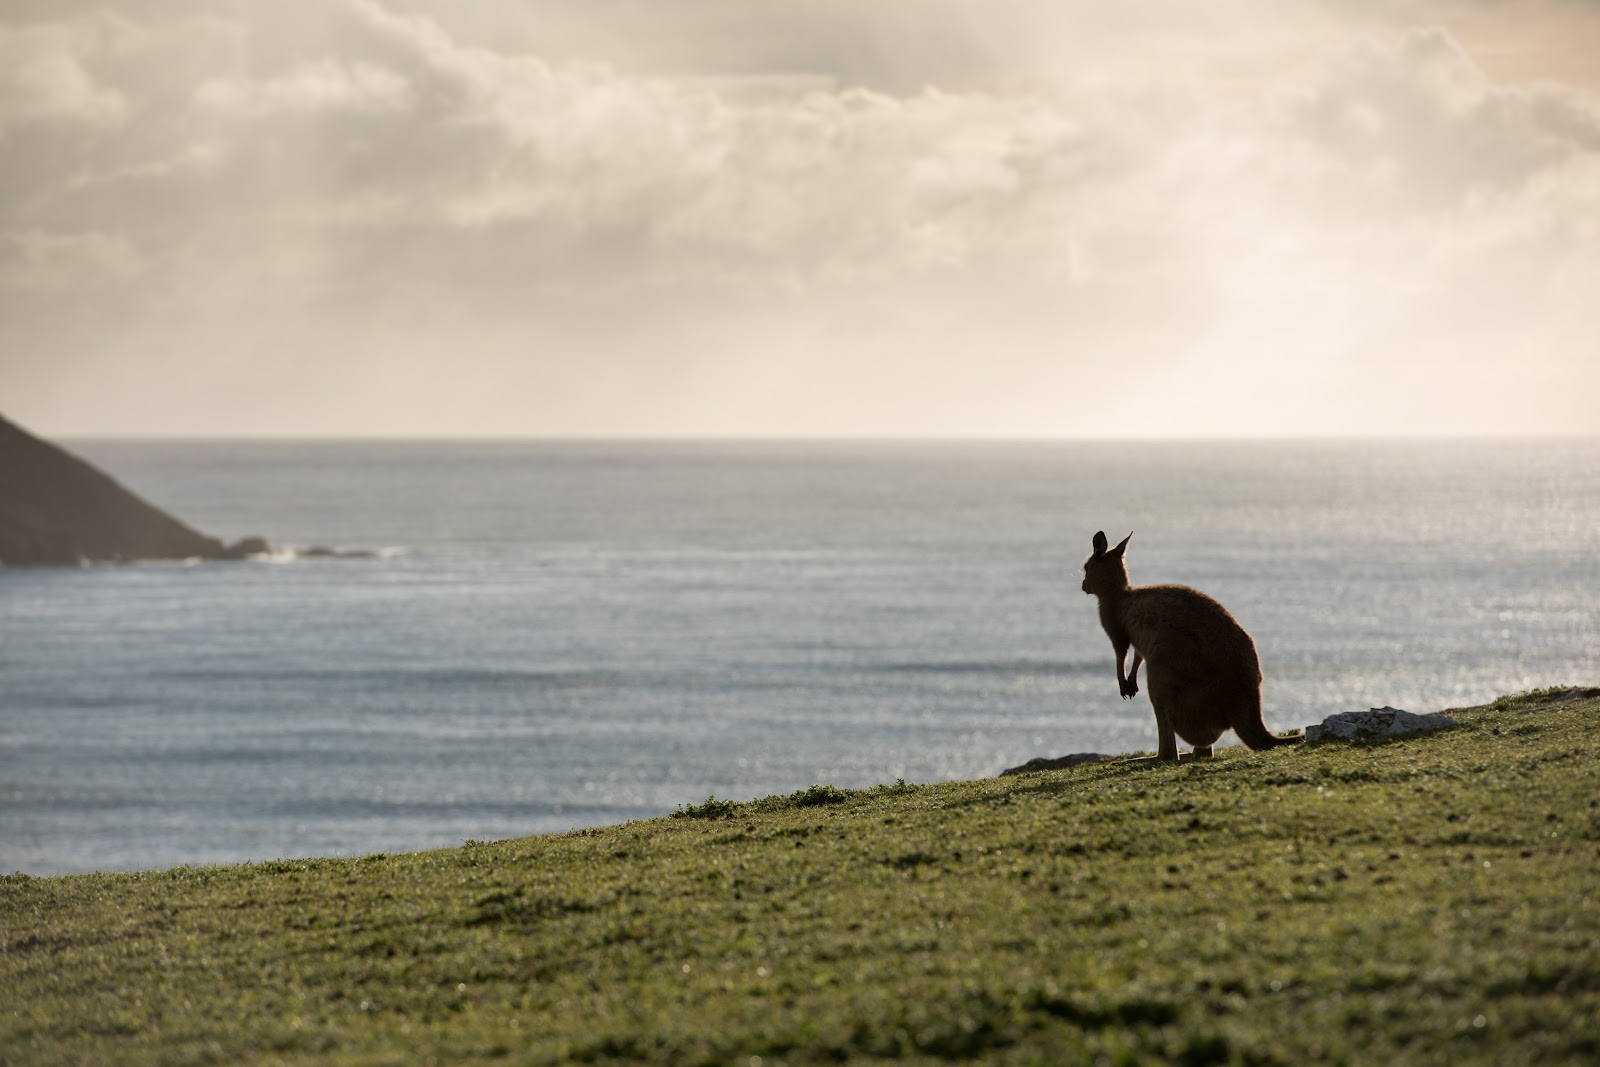 Australia is nearly as large as the continental US. As when any disaster hits, the economy needs a jolt. SAdly Kangaroo Island is one of the most affected places, yet visit is still possible and encouraged. Let me tell you why you SHOULD visit Australia now.